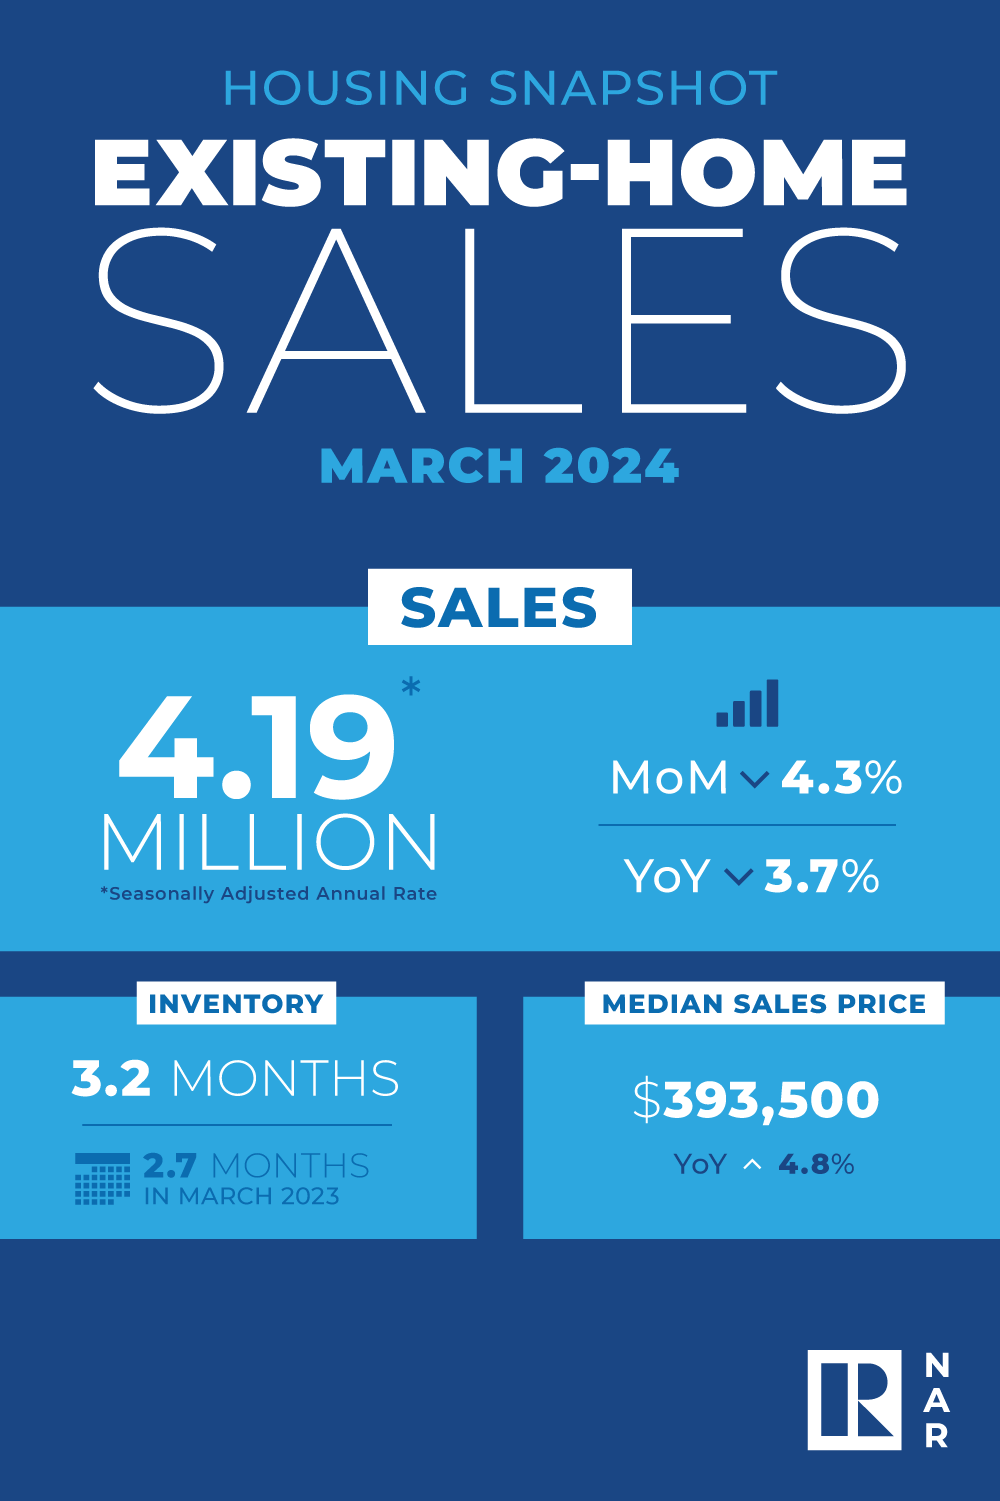 EHS Housing Snapshot Infographic, March 2024